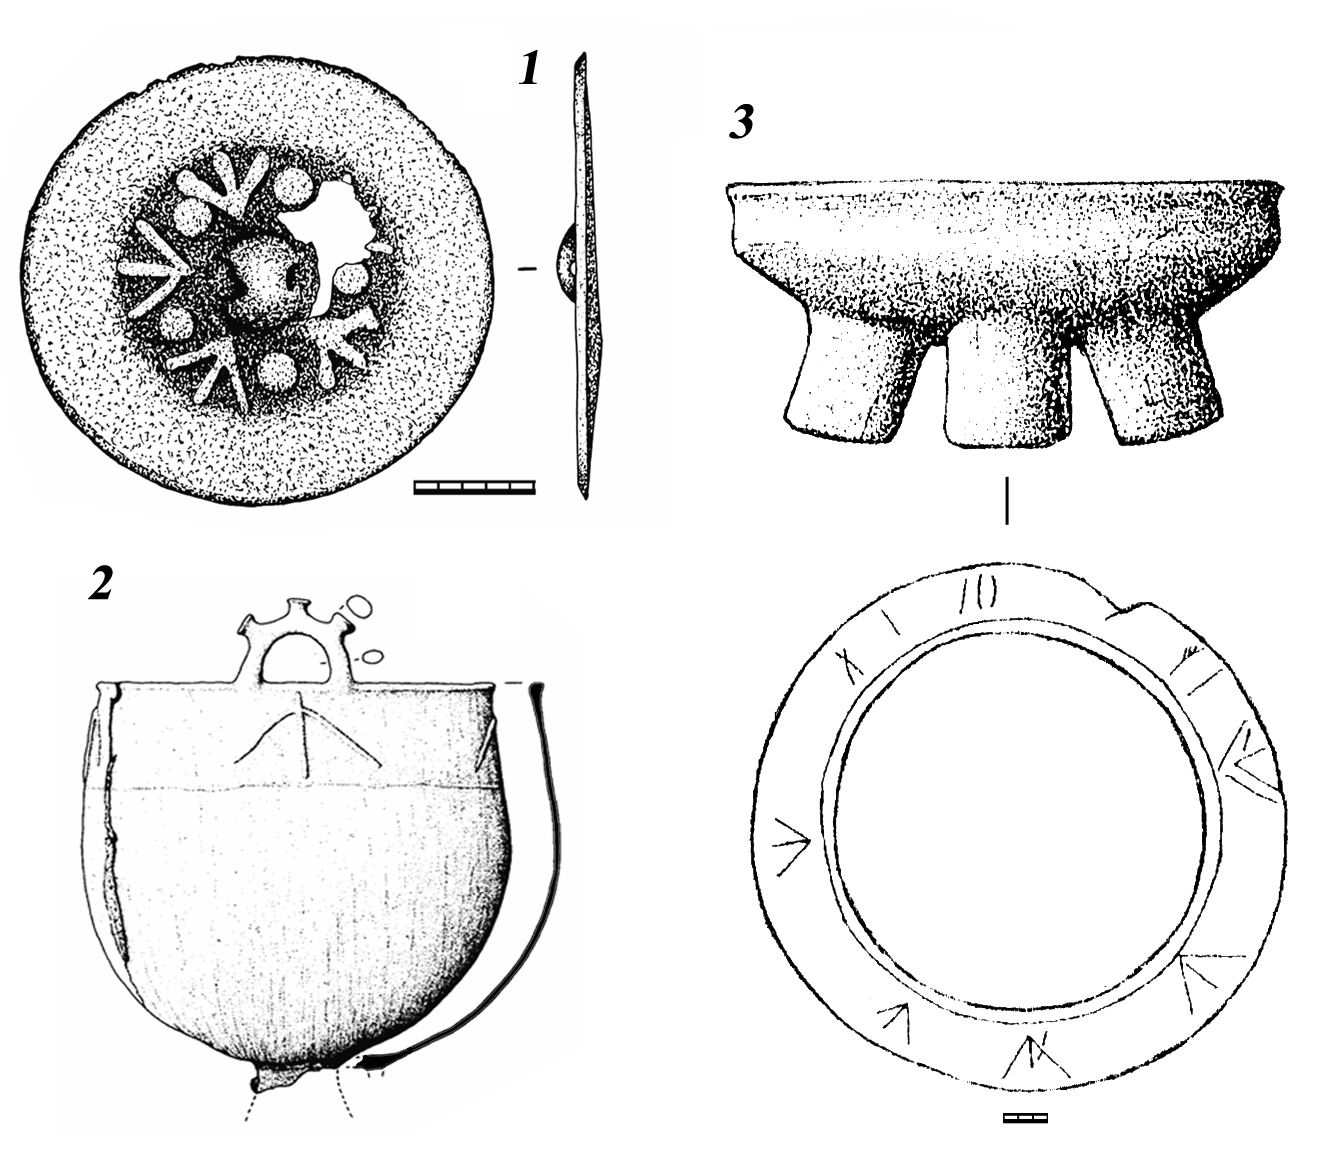 Sign of bird paw – type: 1- bronze cast mirror from tomb 1
	of necropolis of the ancient city of Sidak; 2 - bronze cauldron from
	the Museum in Aral’sk (Boroffka and oth. 2005); 3 - Sarmatian
	altar from Southern Transurals (Tregubov 2000)